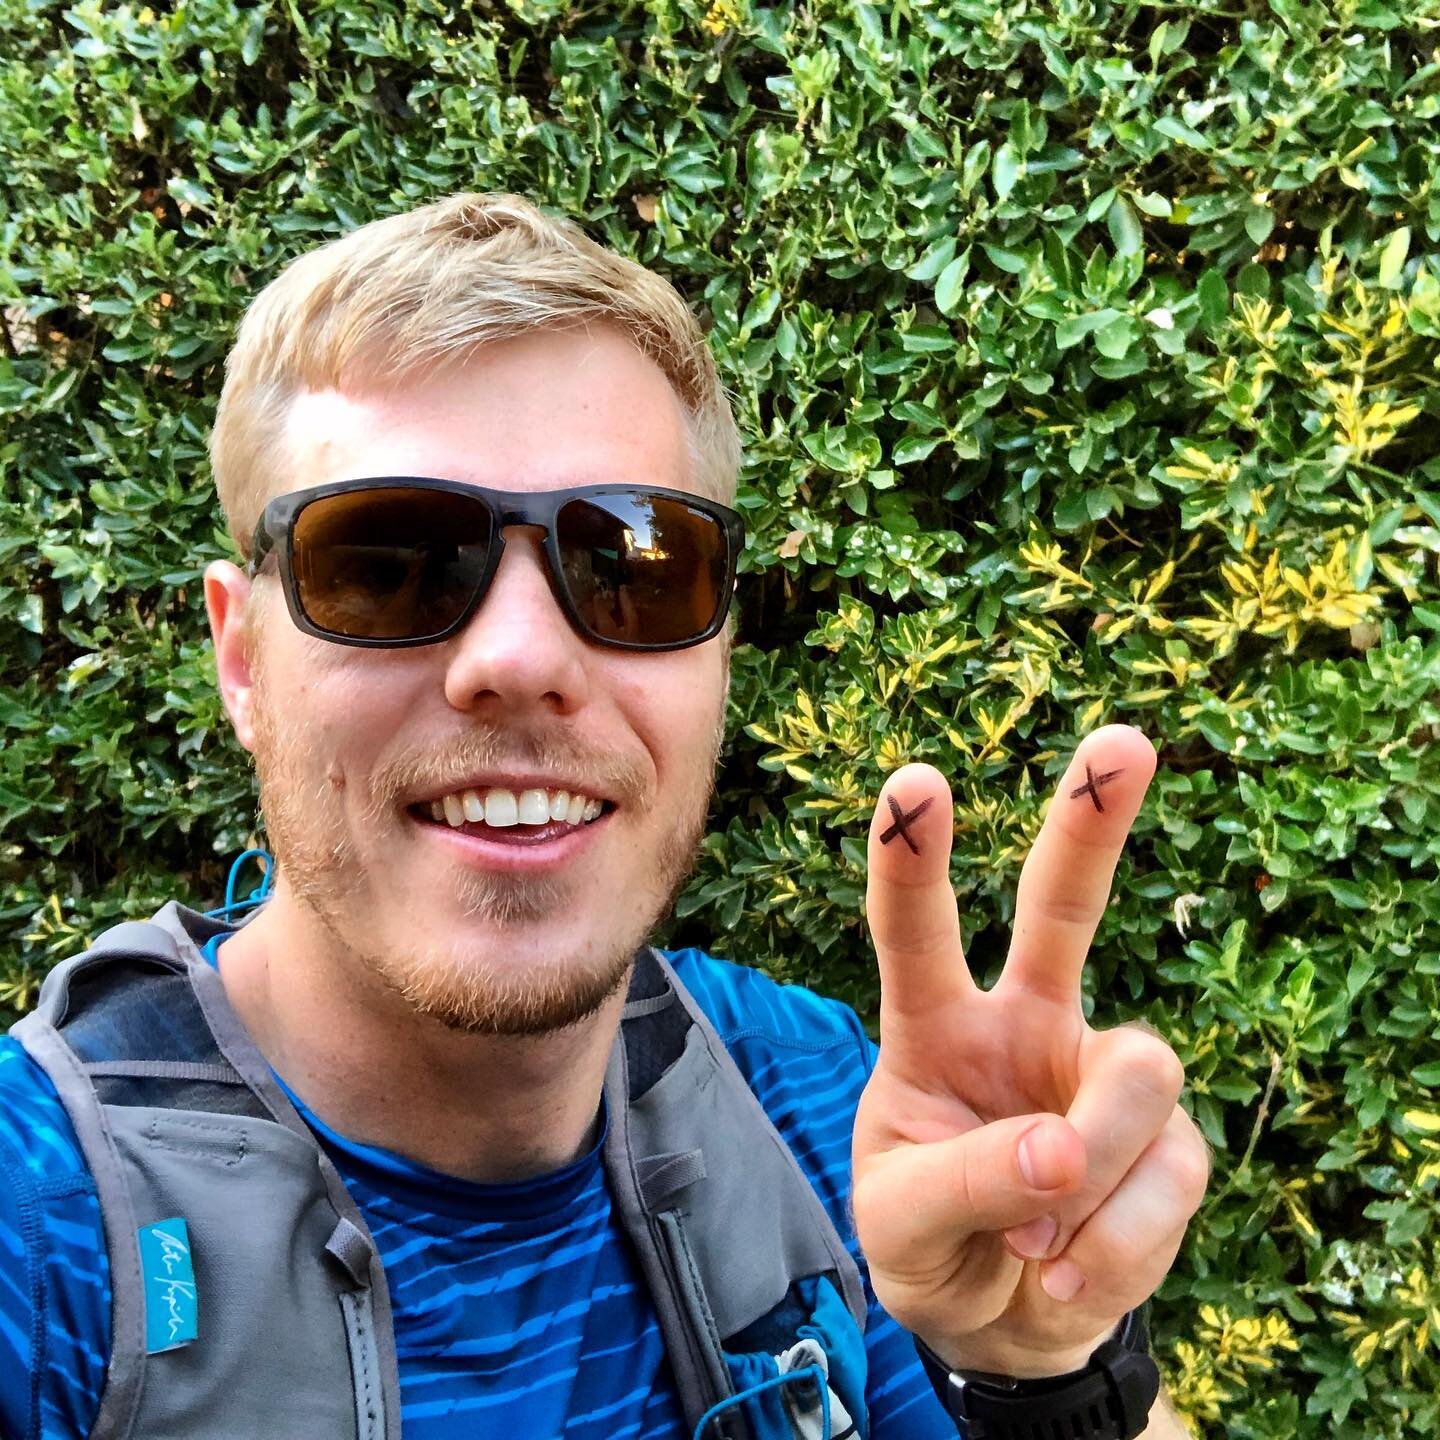 It's not too late! 1 post = a $2 donation to @beyondtype1 and a step toward a world with no fingerpricks. Team up with us and #Dexcom by posting a photo with your peace sign, tag @dexcom and use #PeaceOutFingerpricks, and Dexcom will donate on your b